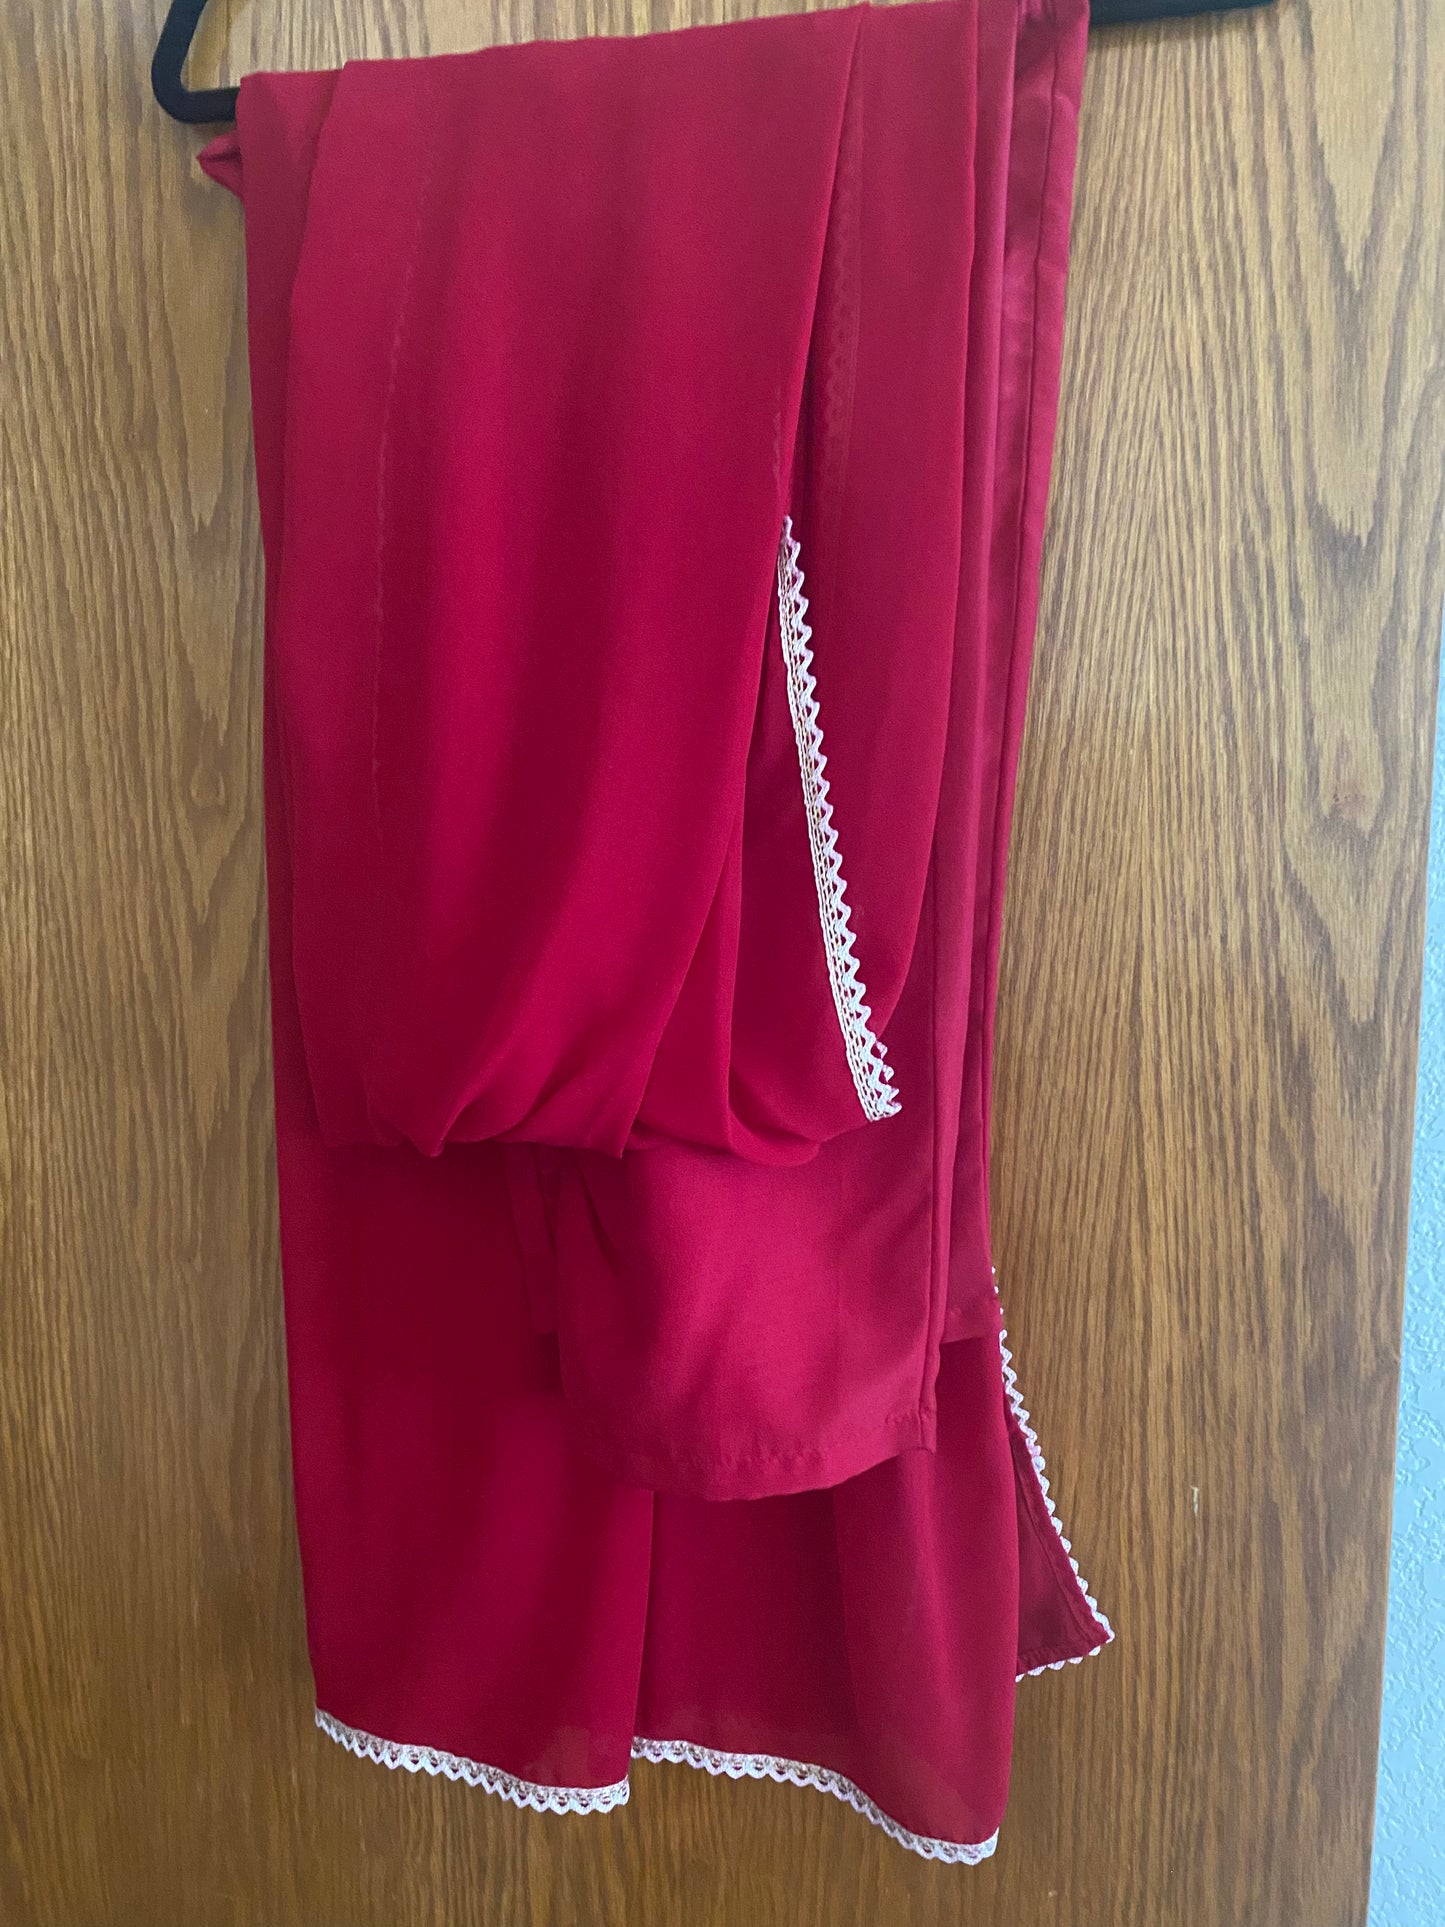 New Clothing: Red 3 Piece Semi Formal Dress